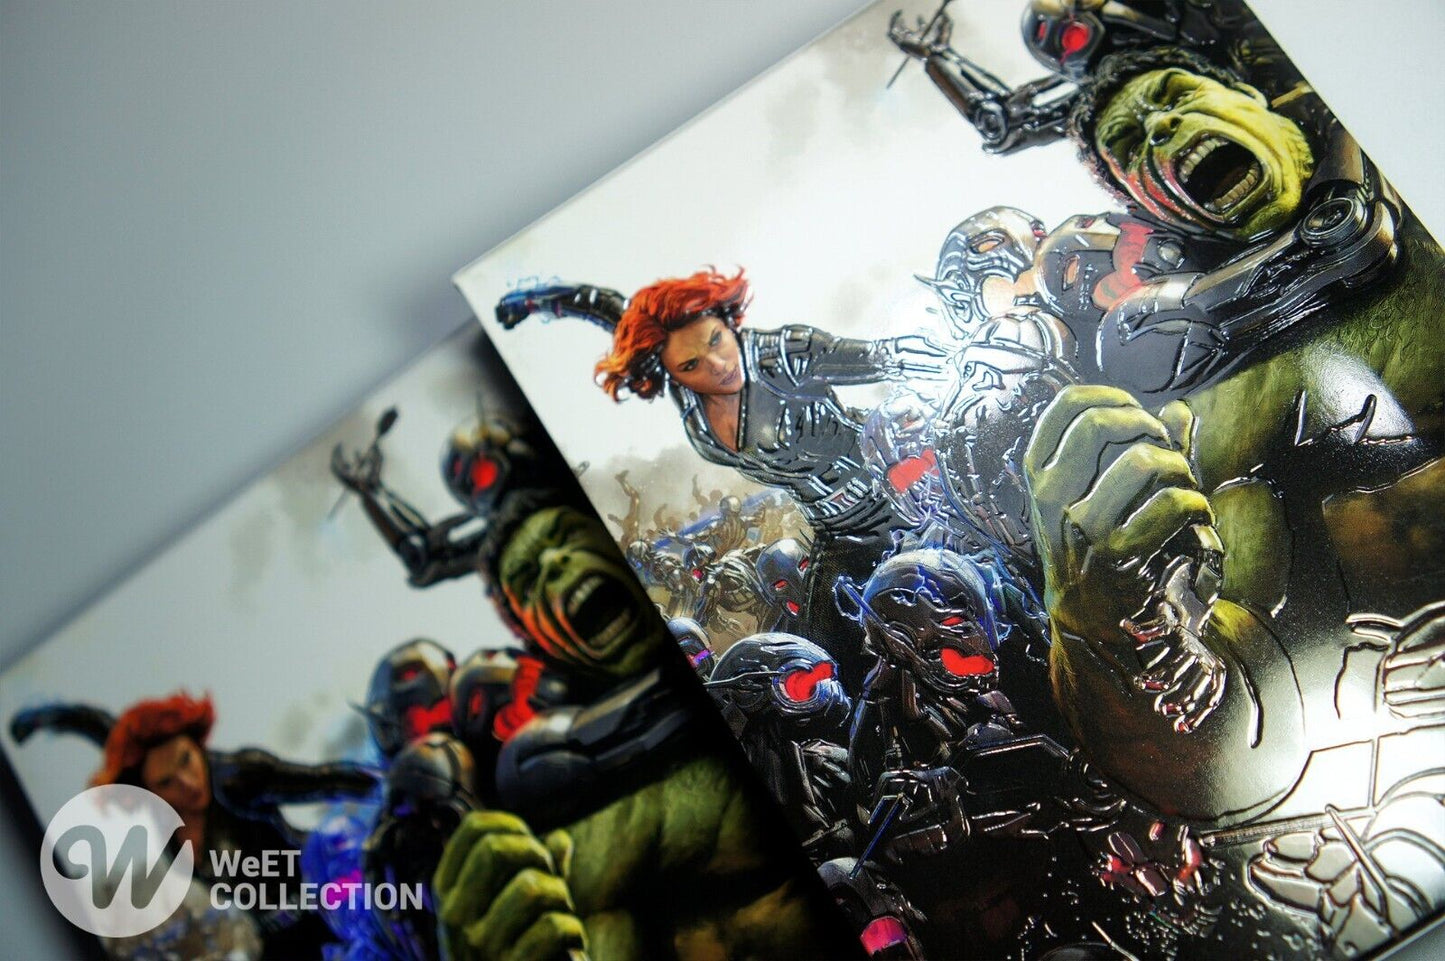 Avengers: Age of Ultron 4K+2D+3D Blu-ray SteelBook WeET Collection Exclusive #15 Lenticular Full Slip B1